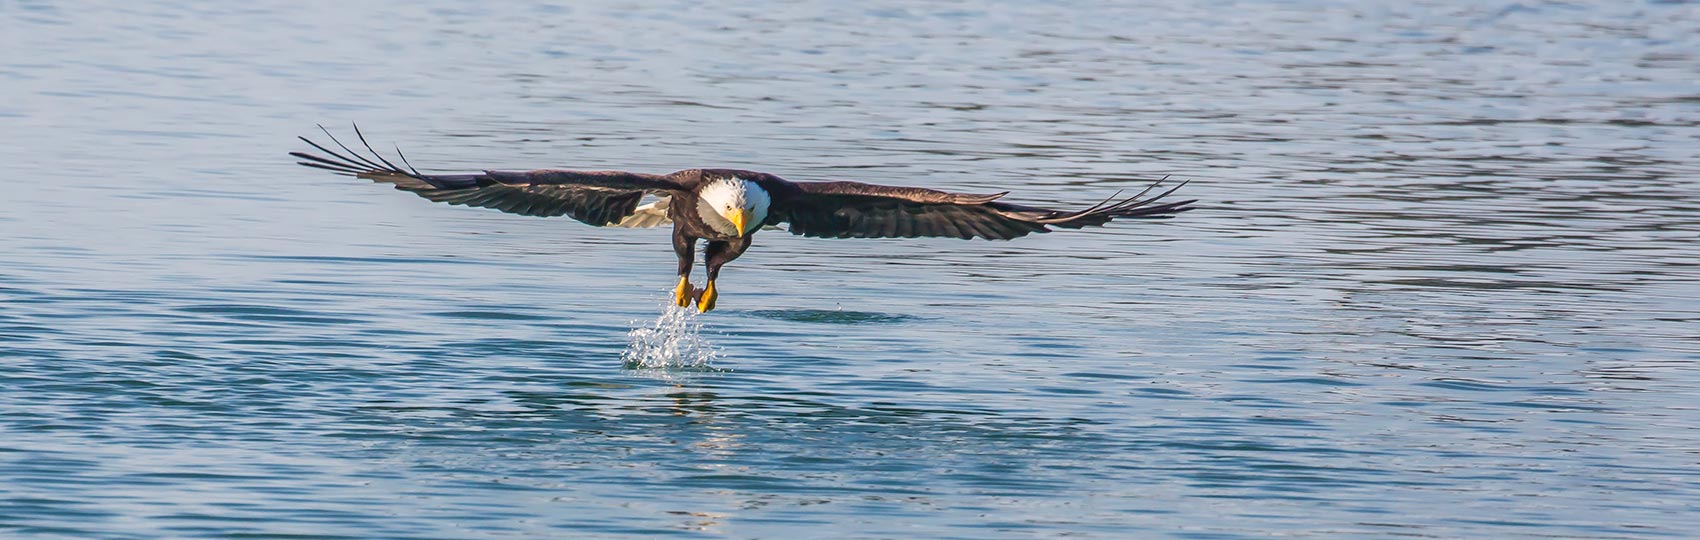 A bald eagle swoops down to catch a fish.